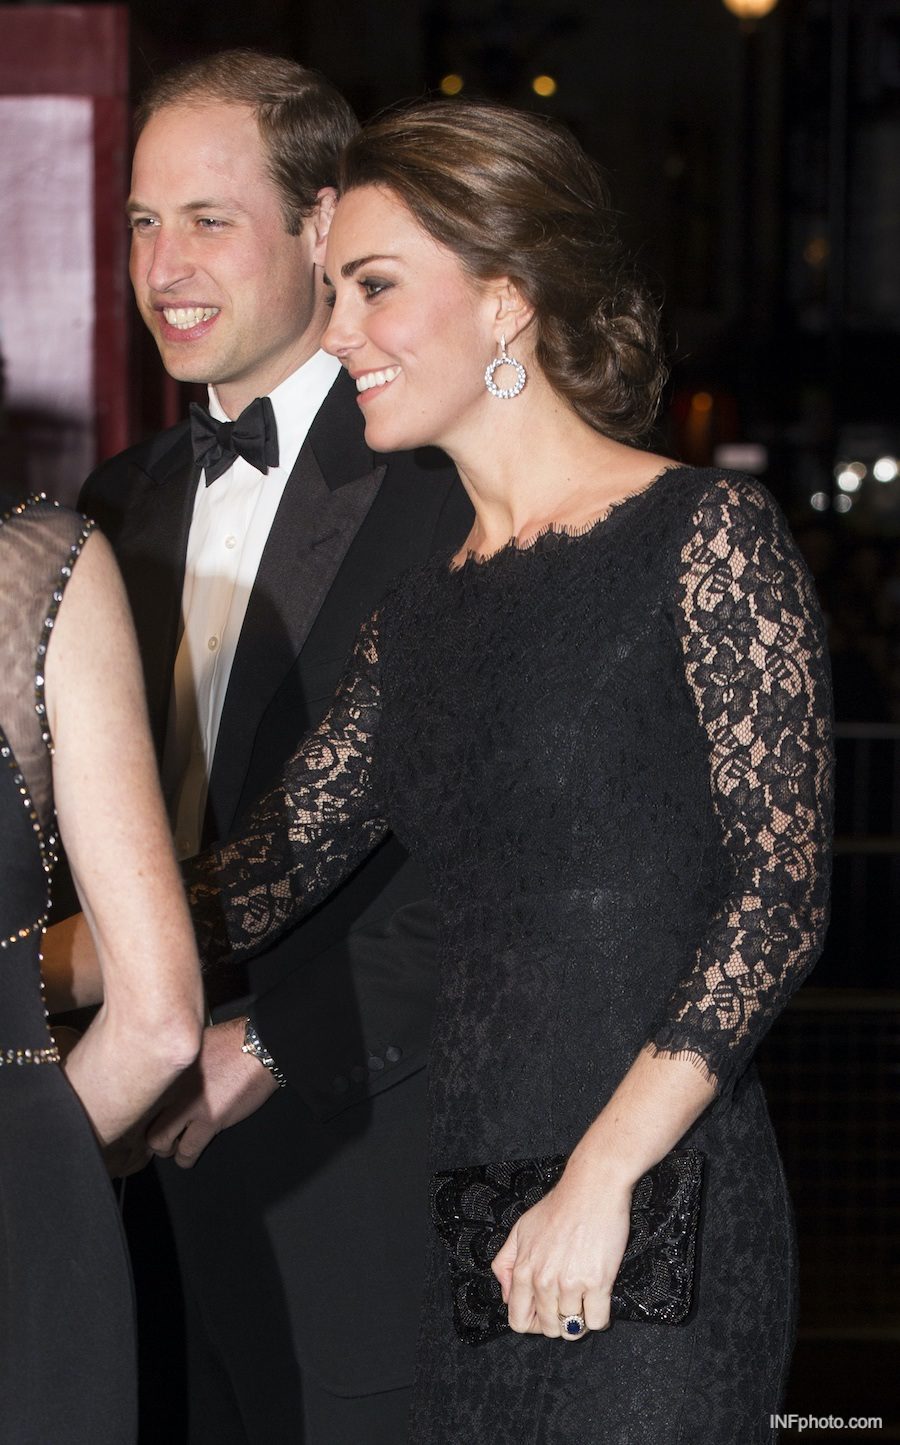 Kate Middleton at the Royal Variety Performance in 2014